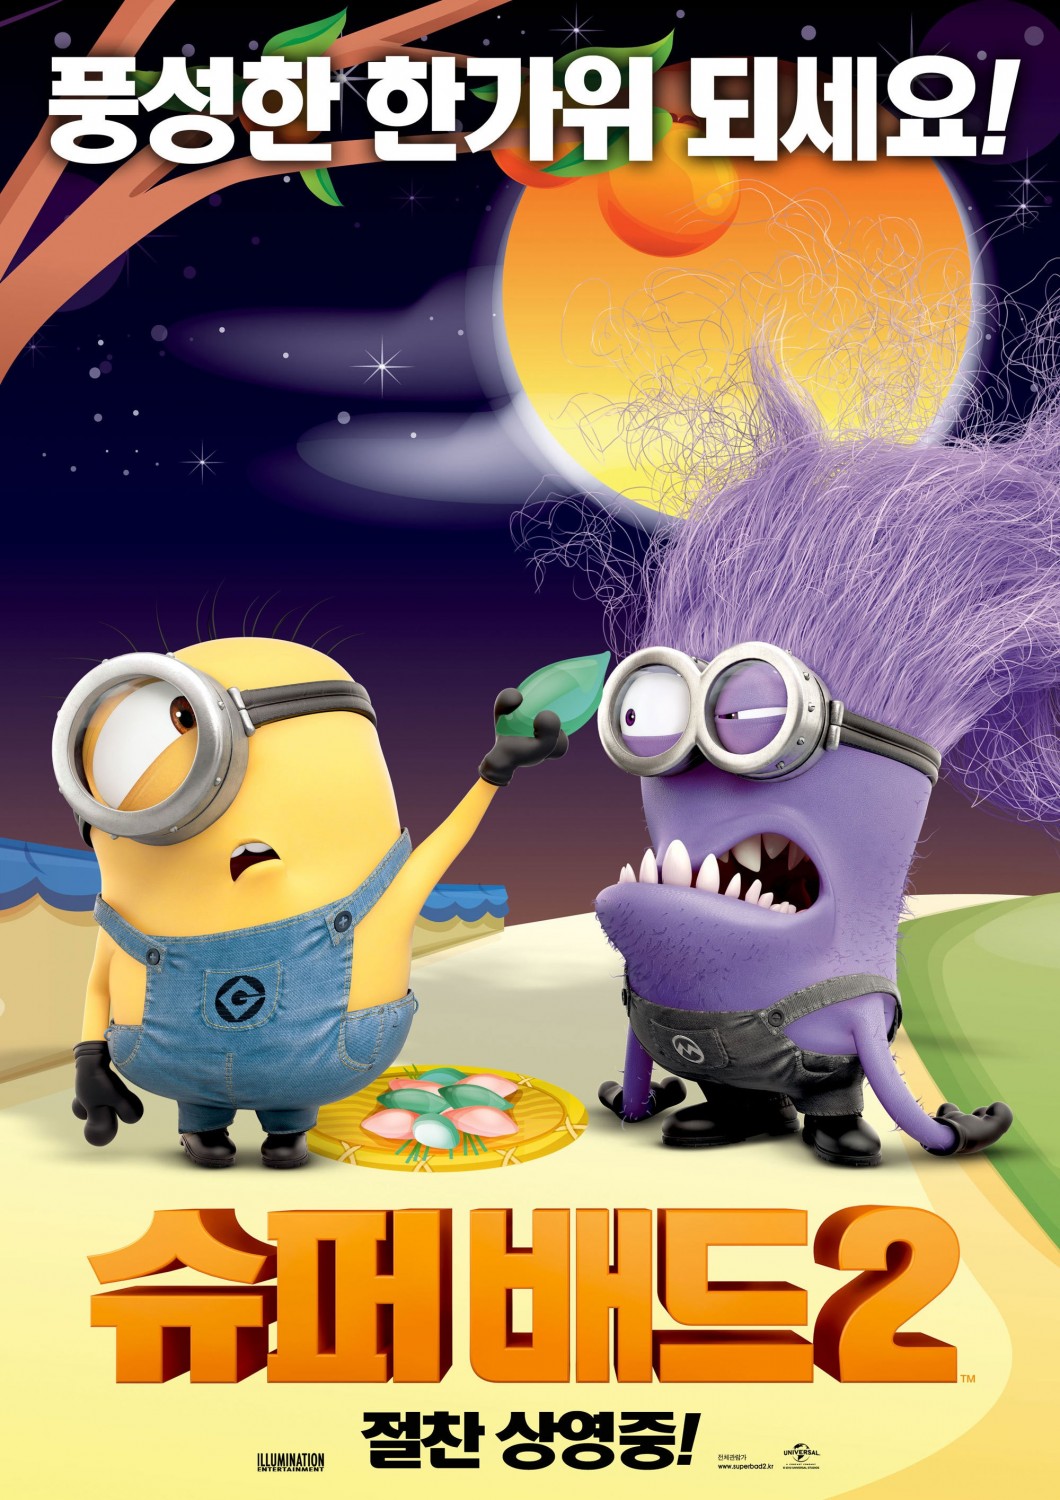 Extra Large Movie Poster Image for Despicable Me 2 (#27 of 28)